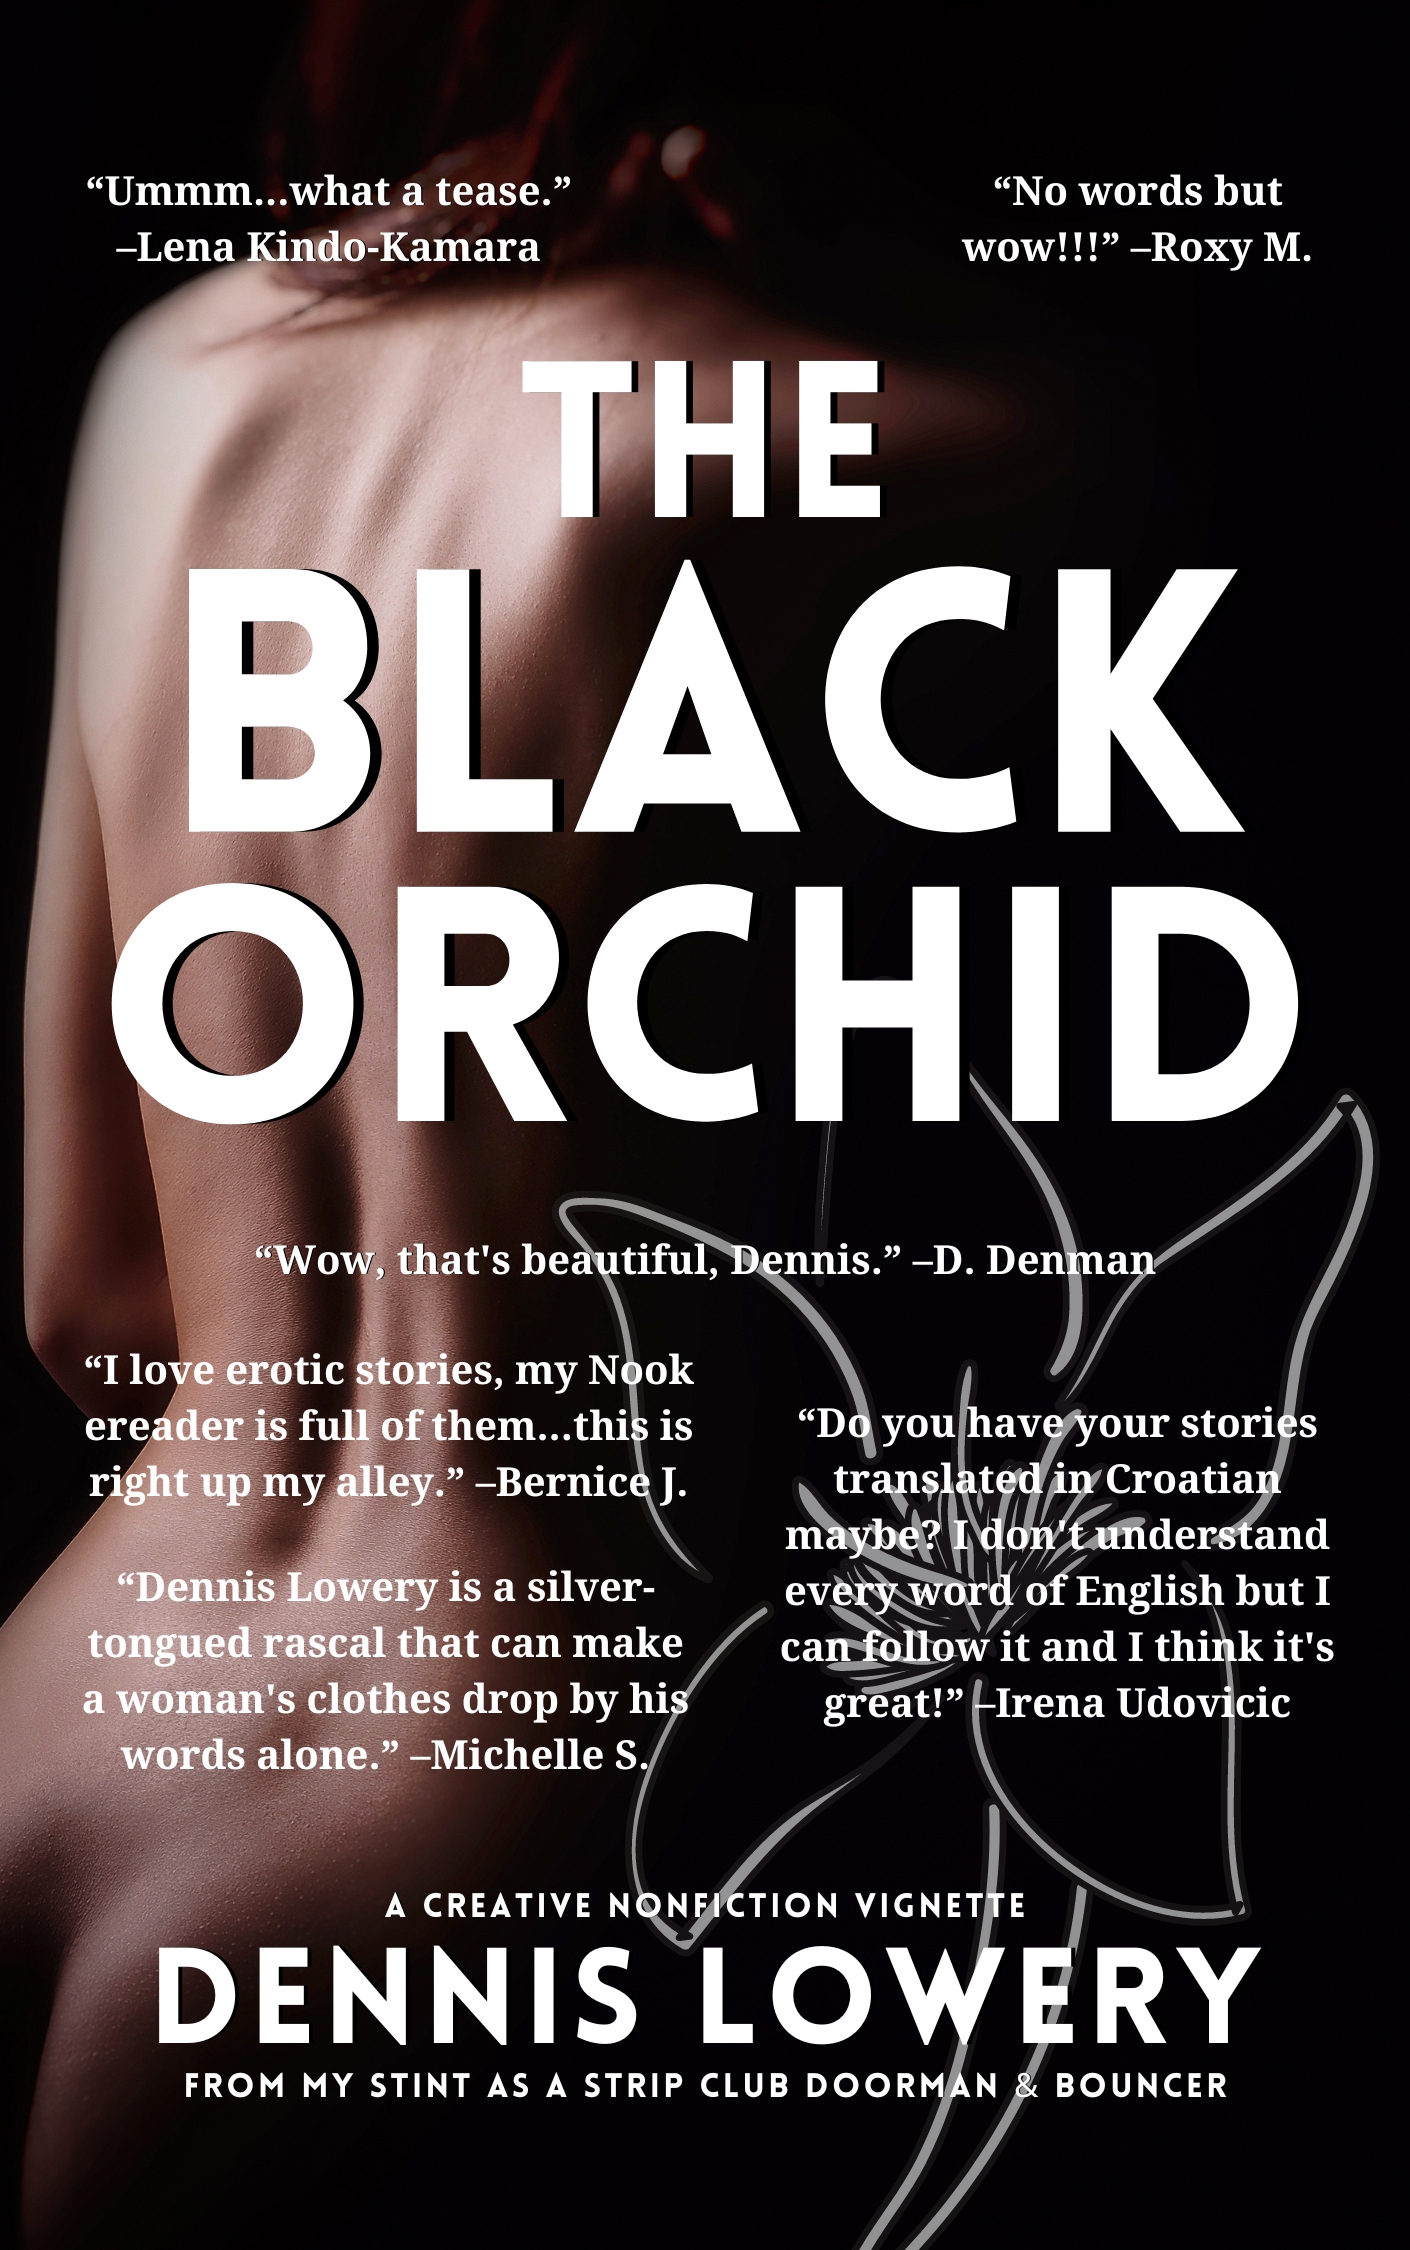 THE BLACK ORCHID (Creative Nonfiction) A Vignette from Dennis Lowery